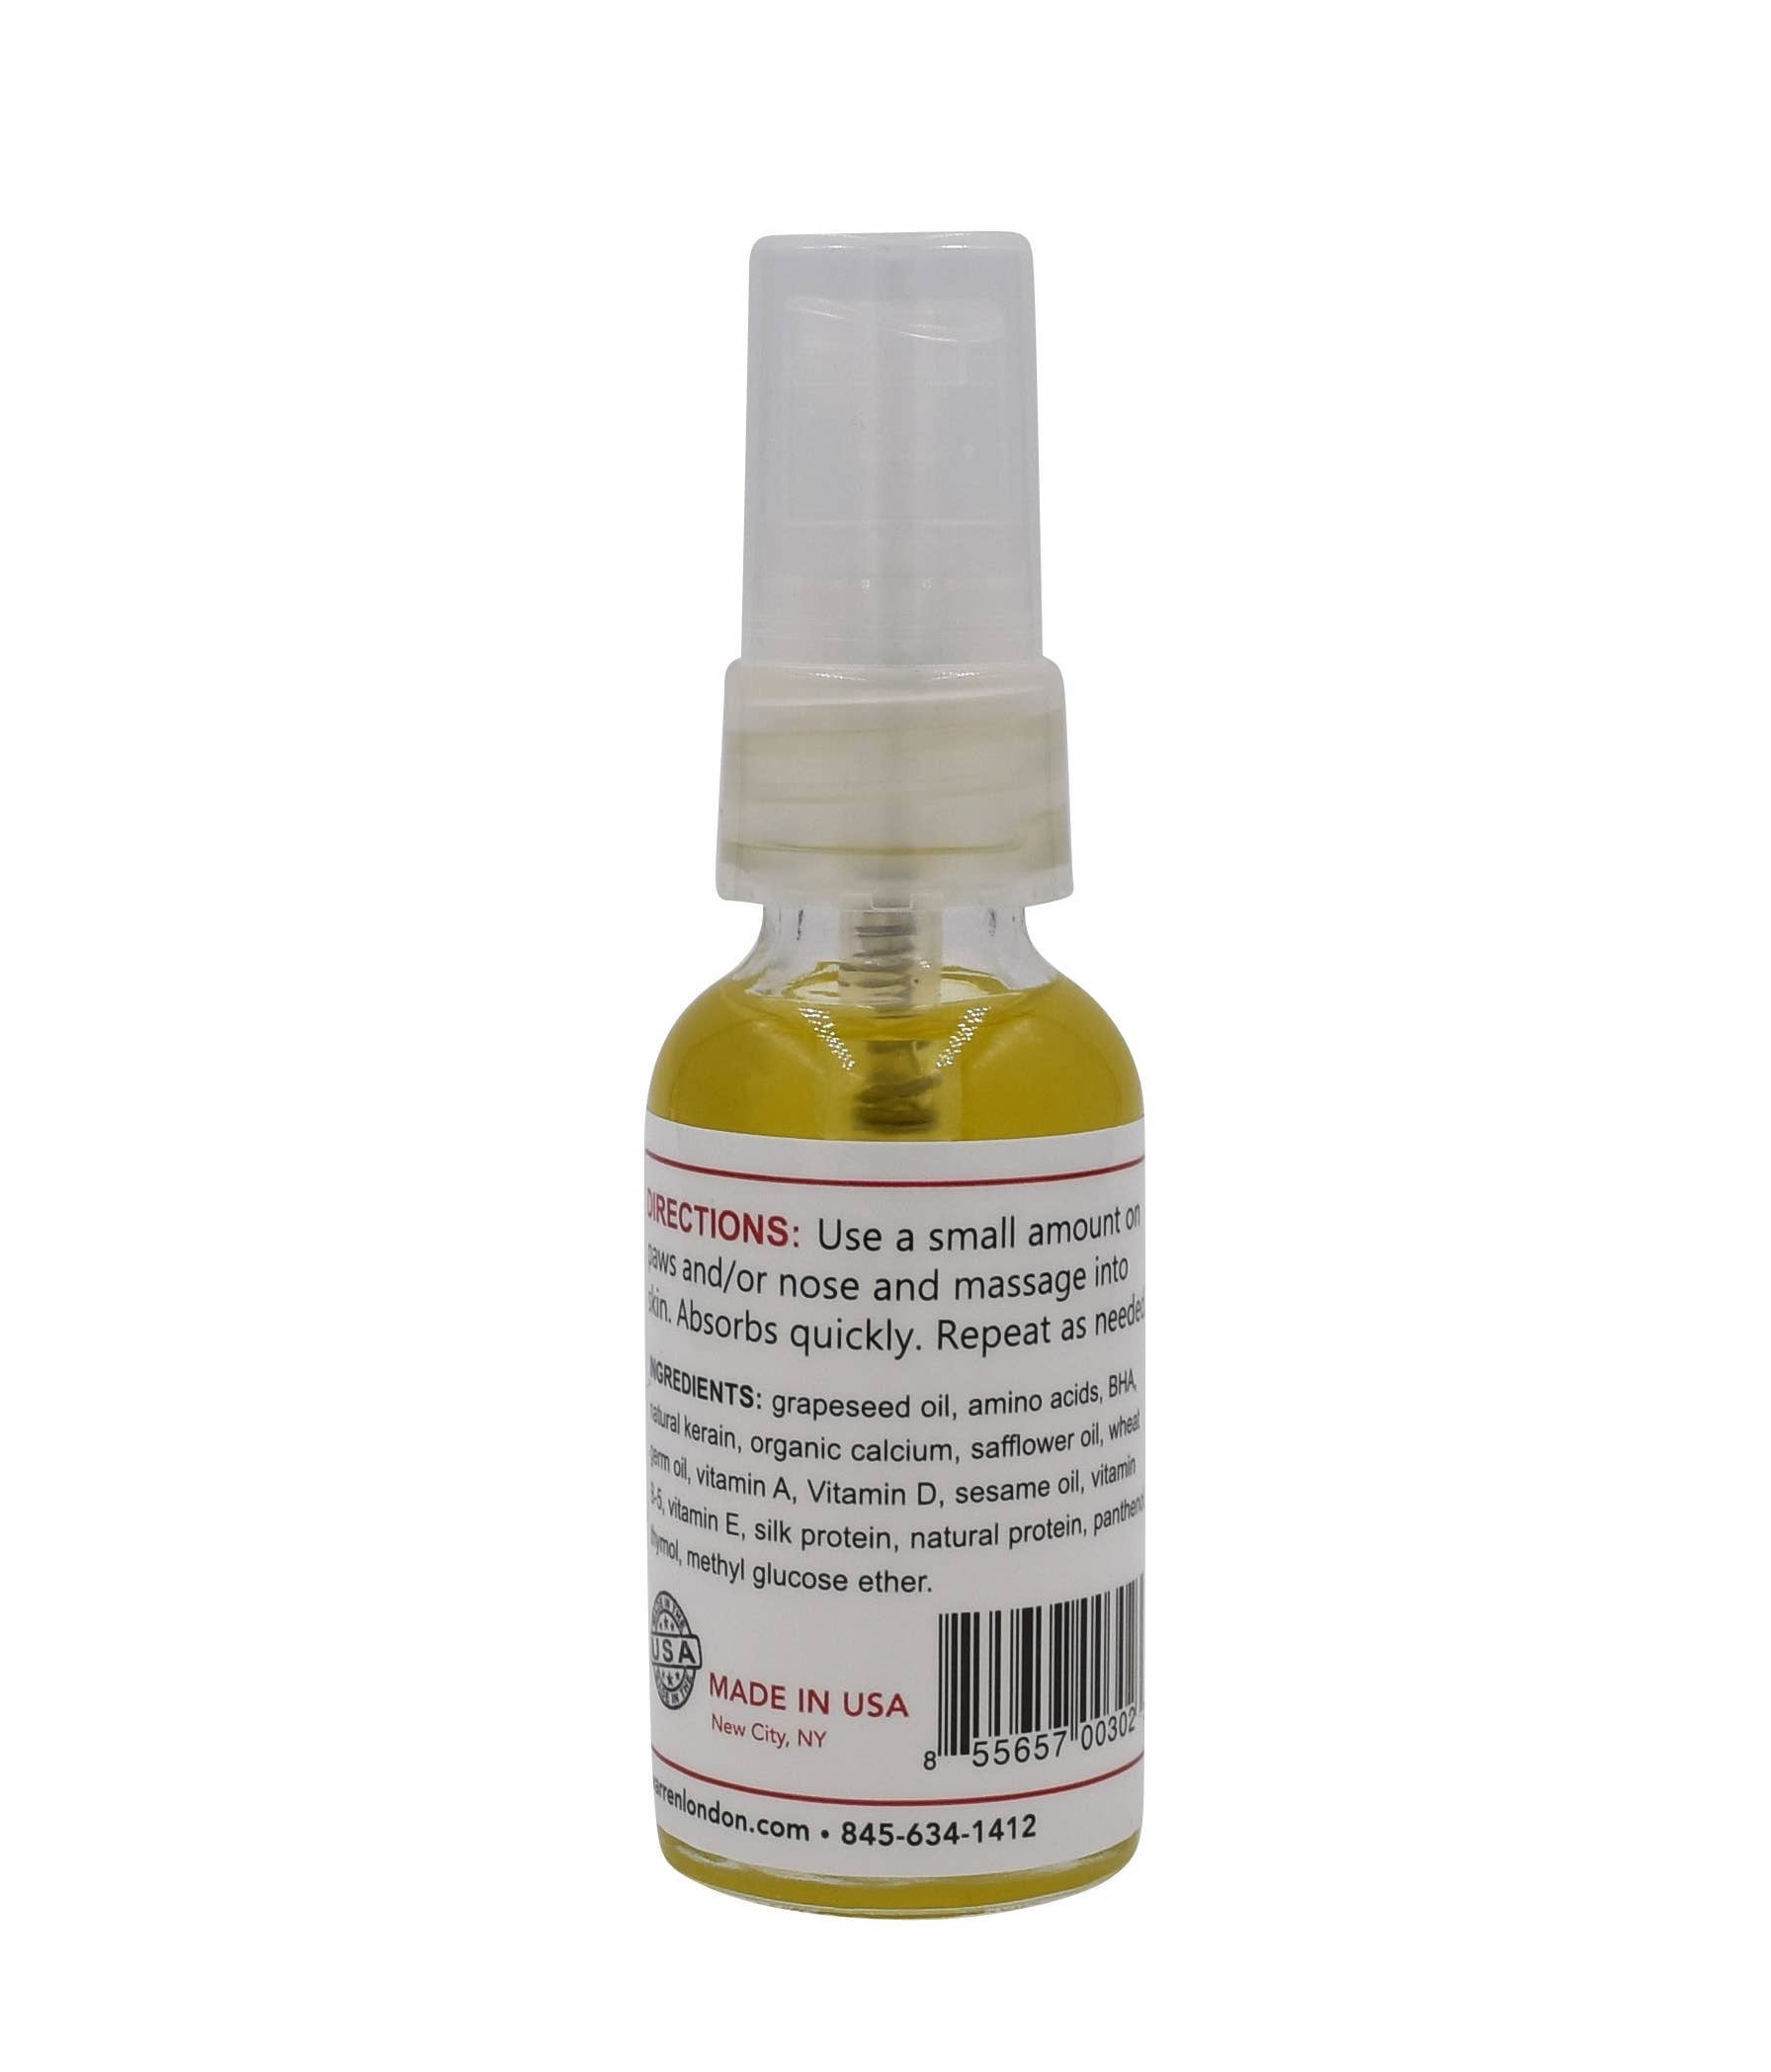 Warren London Dog Products - Grapeseed Oil Paw Revitalizer - 2 Sizes